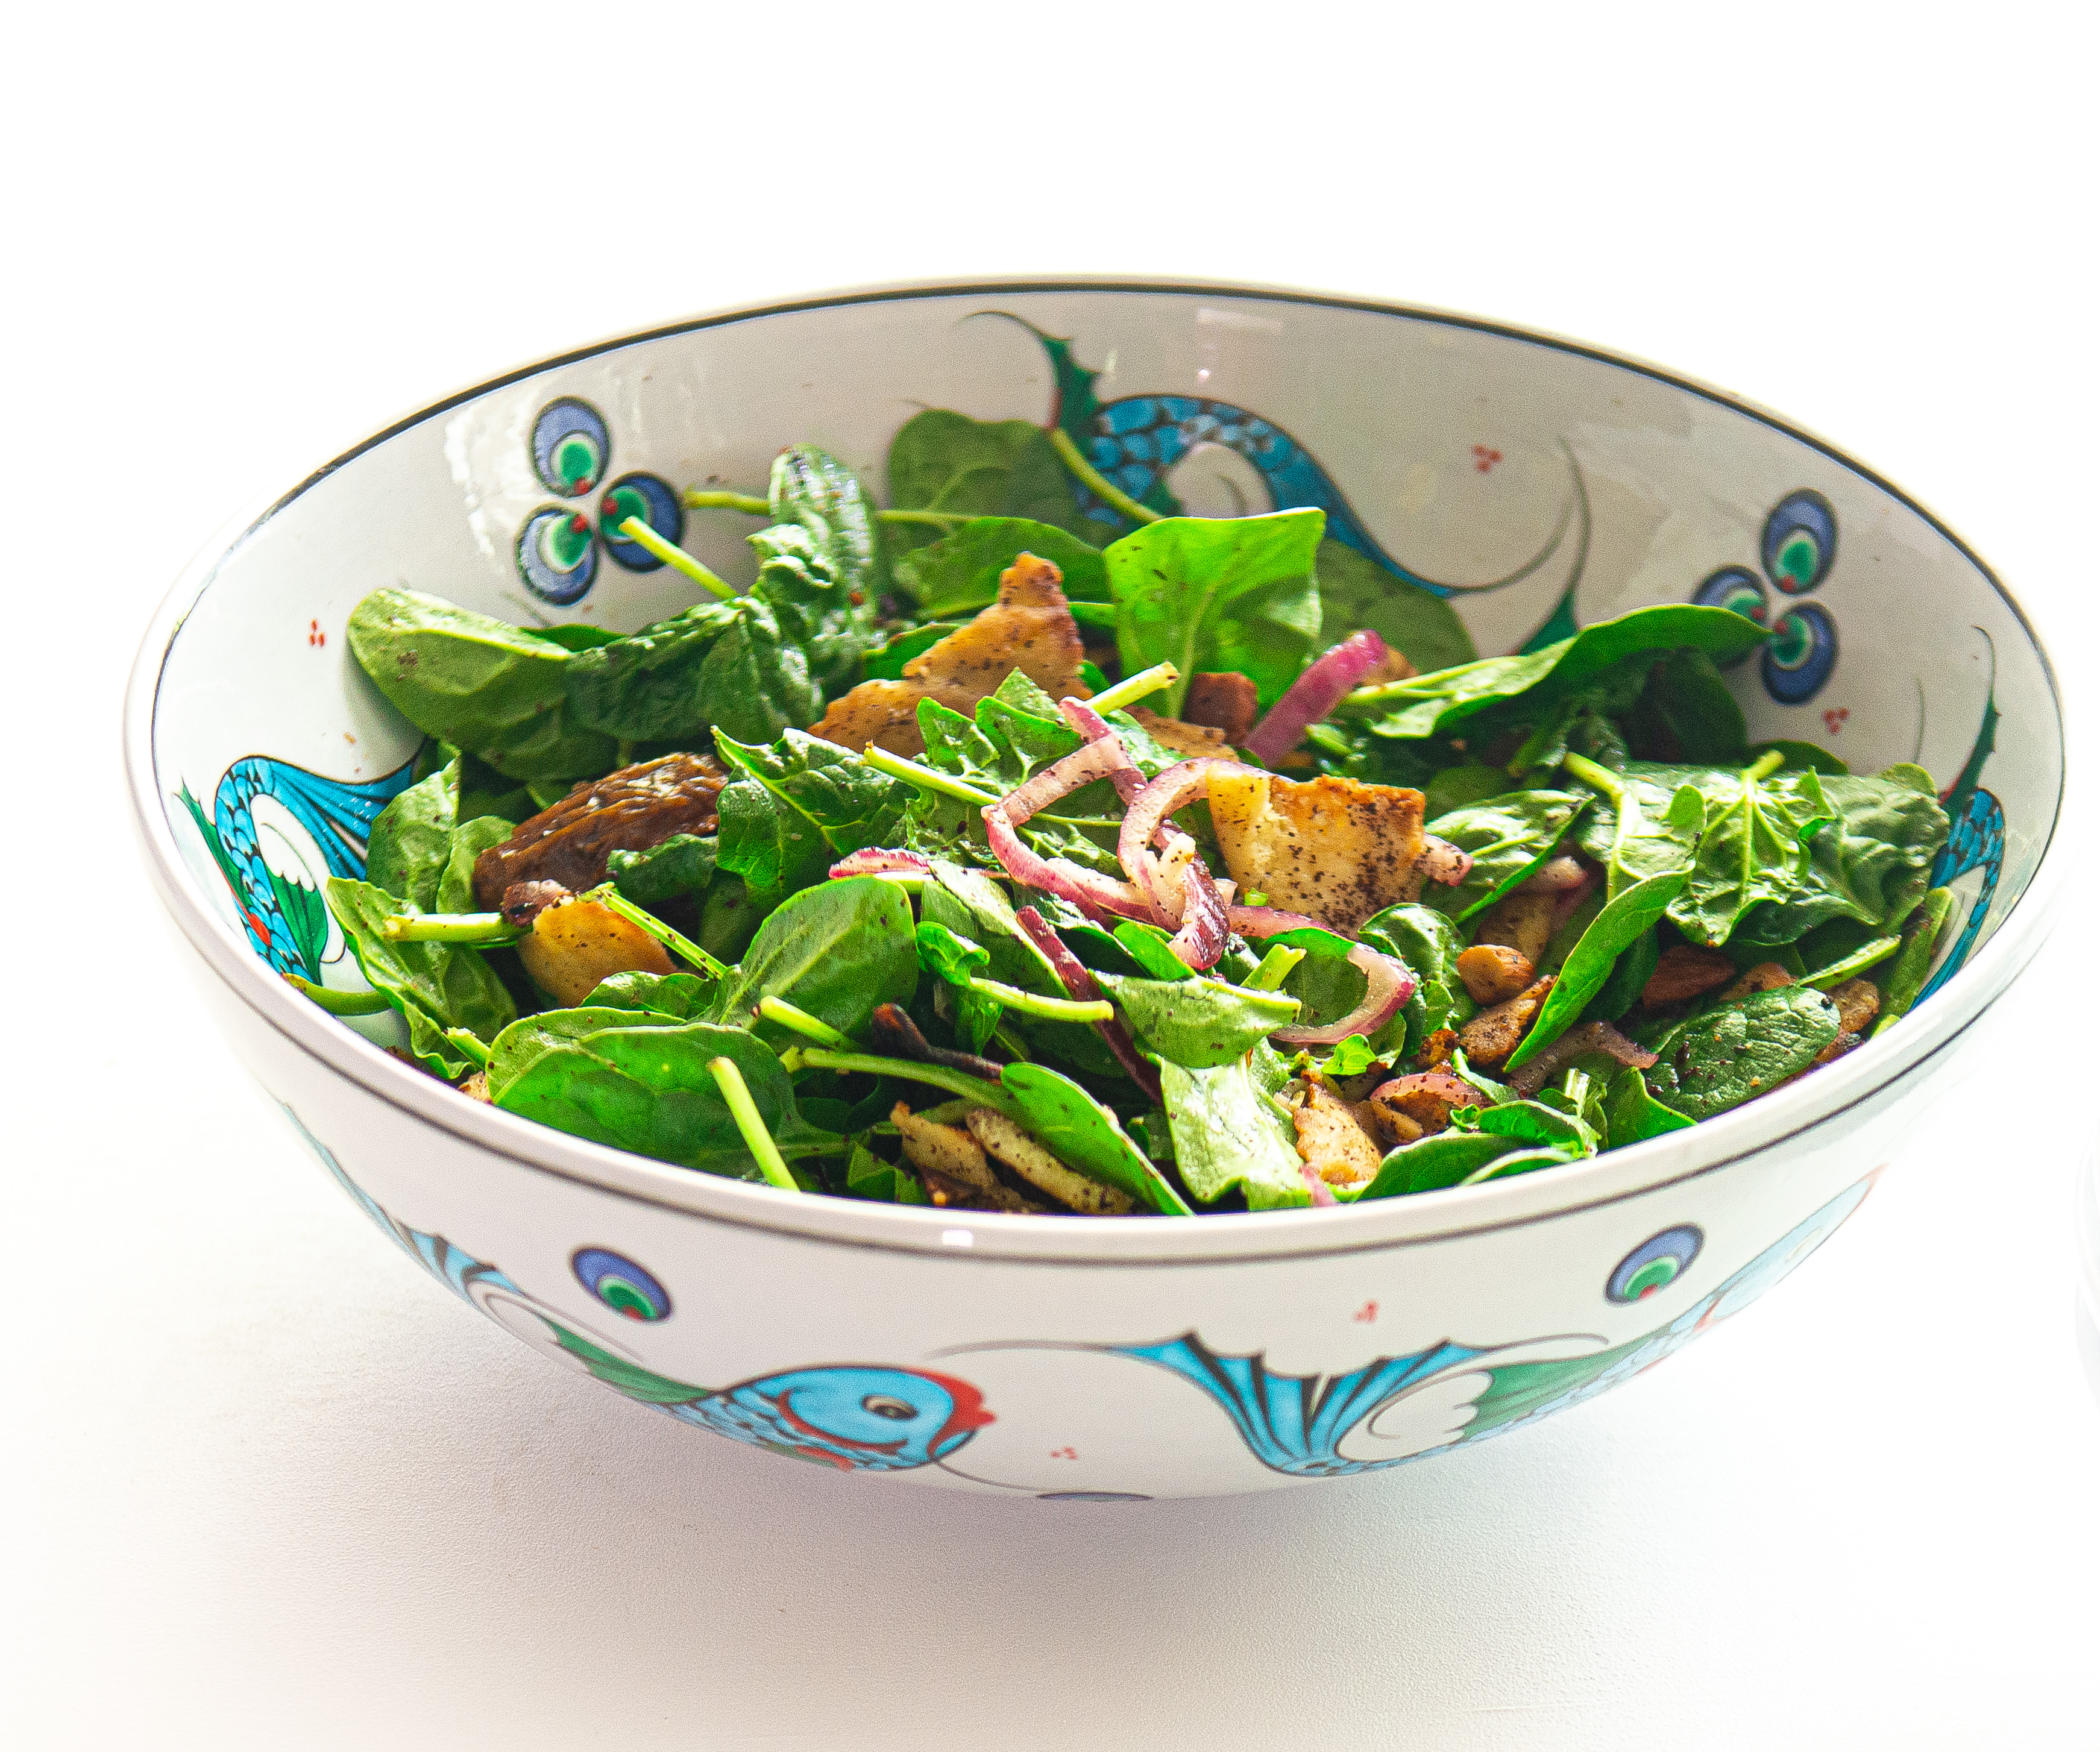 Mediterranean Spinach Salad With Dates and Almonds